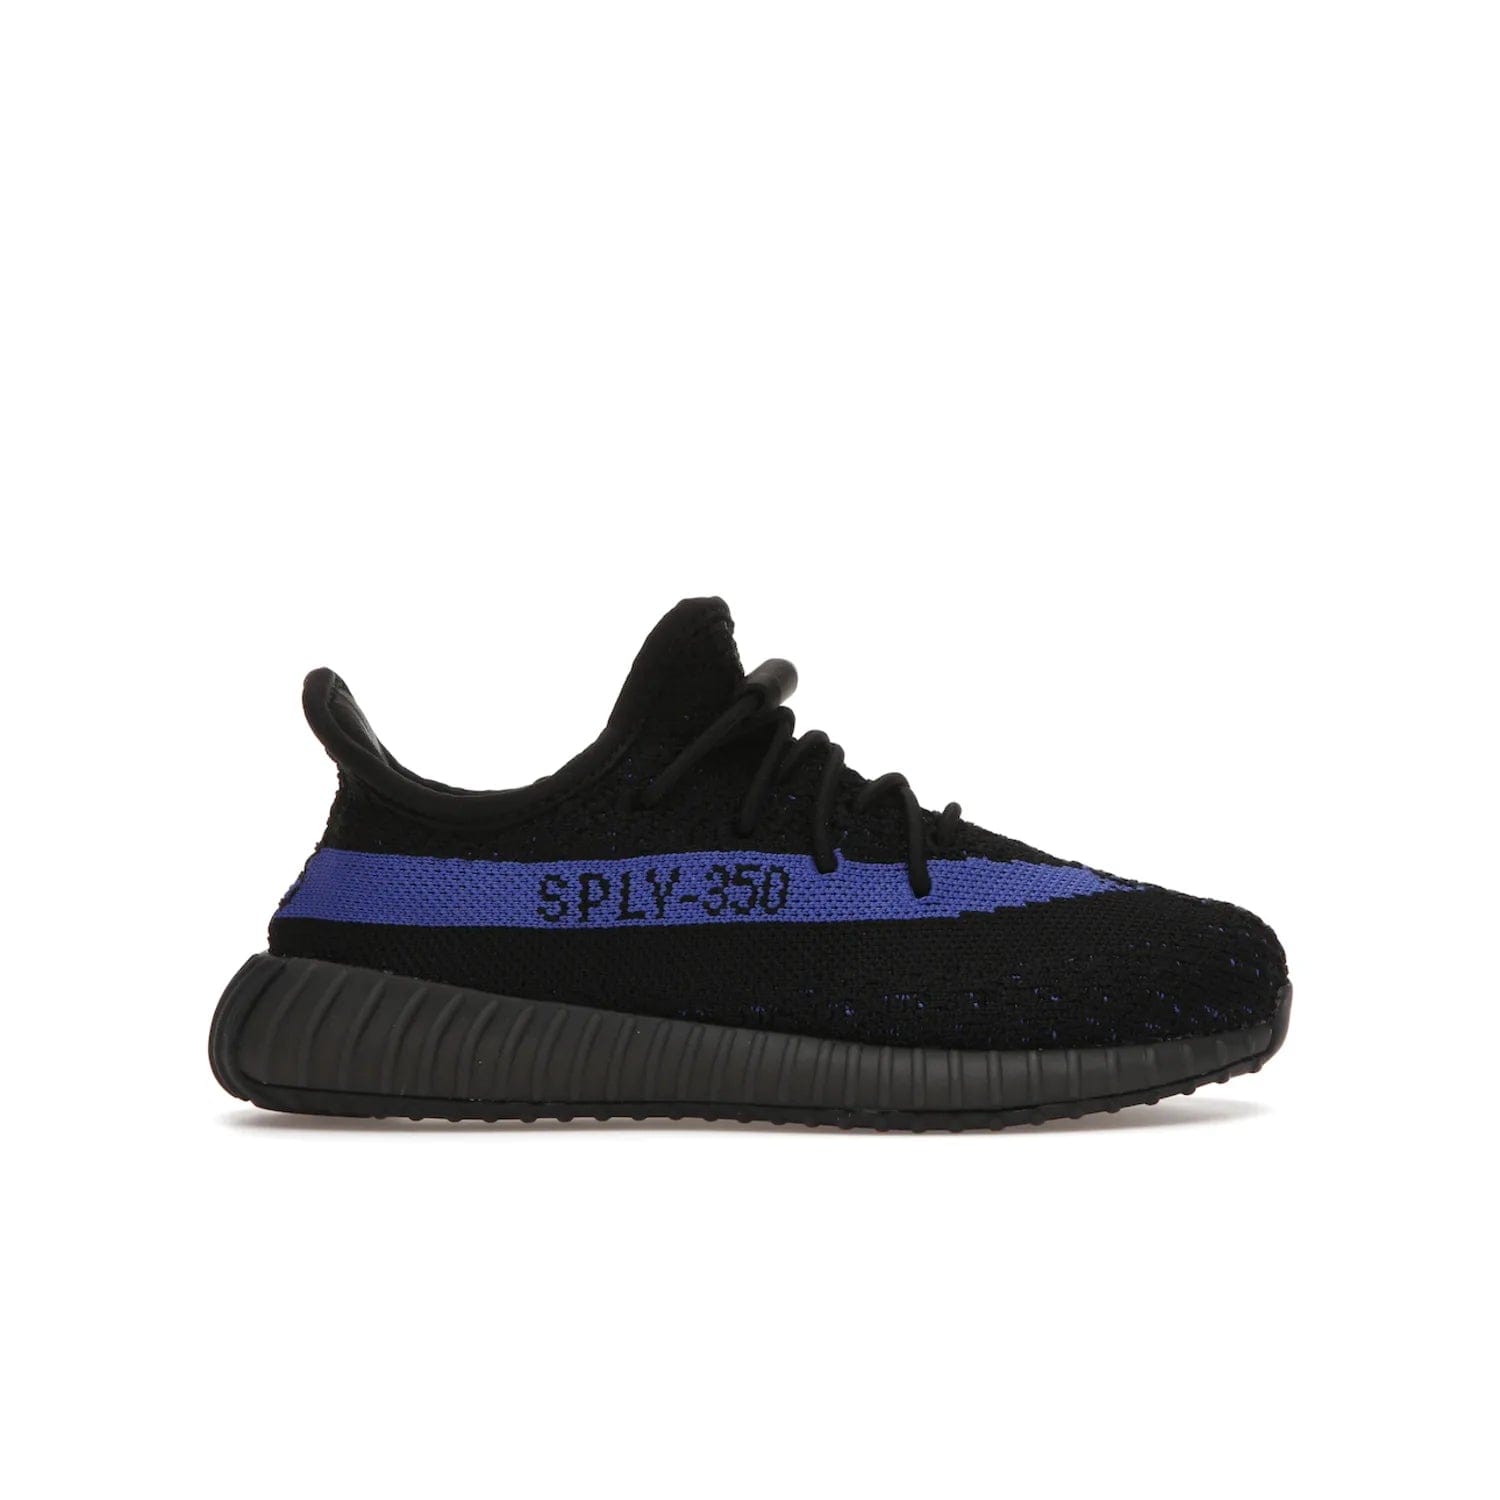 adidas Yeezy Boost 350 V2 Dazzling Blue (Kids) - Image 1 - Only at www.BallersClubKickz.com - Shop the adidas Yeezy Boost 350 V2 Dazzling Blue (Kids). Features a black Primeknit upper with a royal blue 'SPLY-350' streak and a full-length Boost midsole. Durable rubber outsole provides plenty of traction. Available for $160.